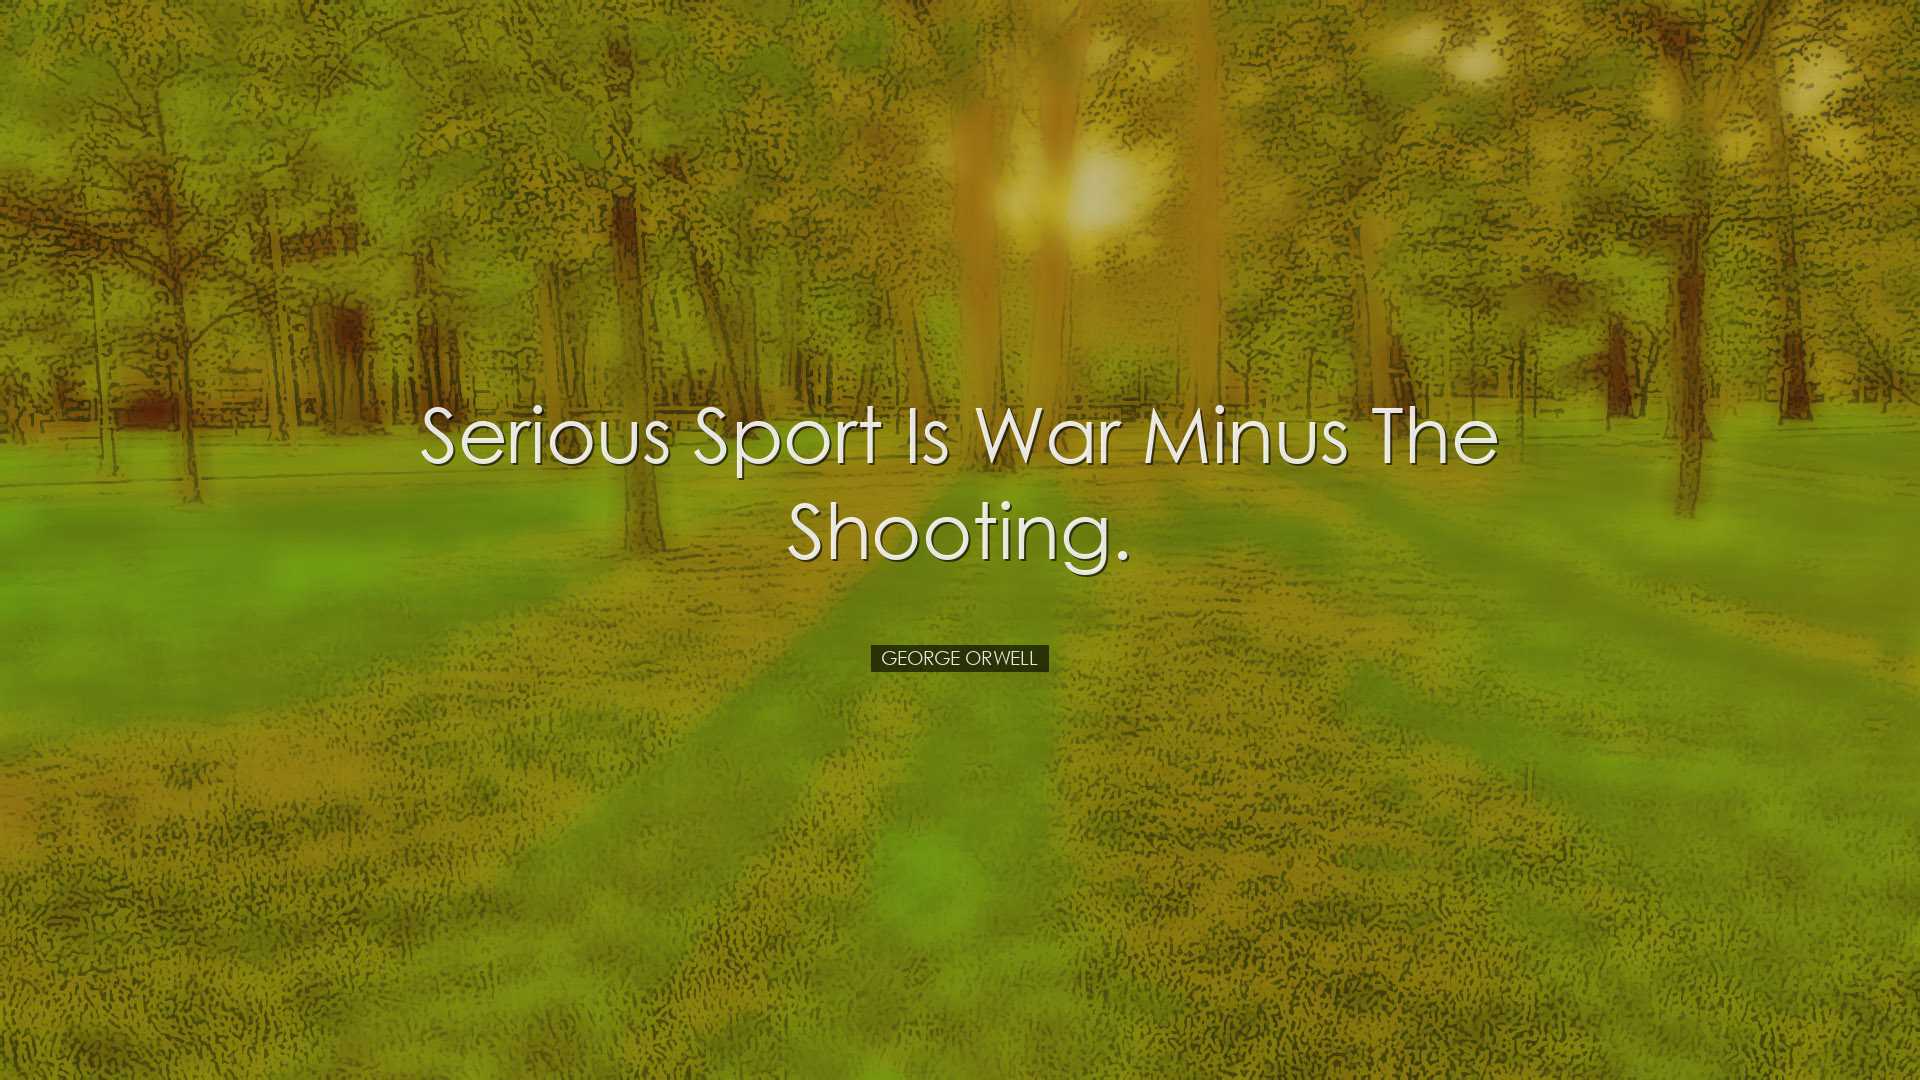 Serious sport is war minus the shooting. - George Orwell